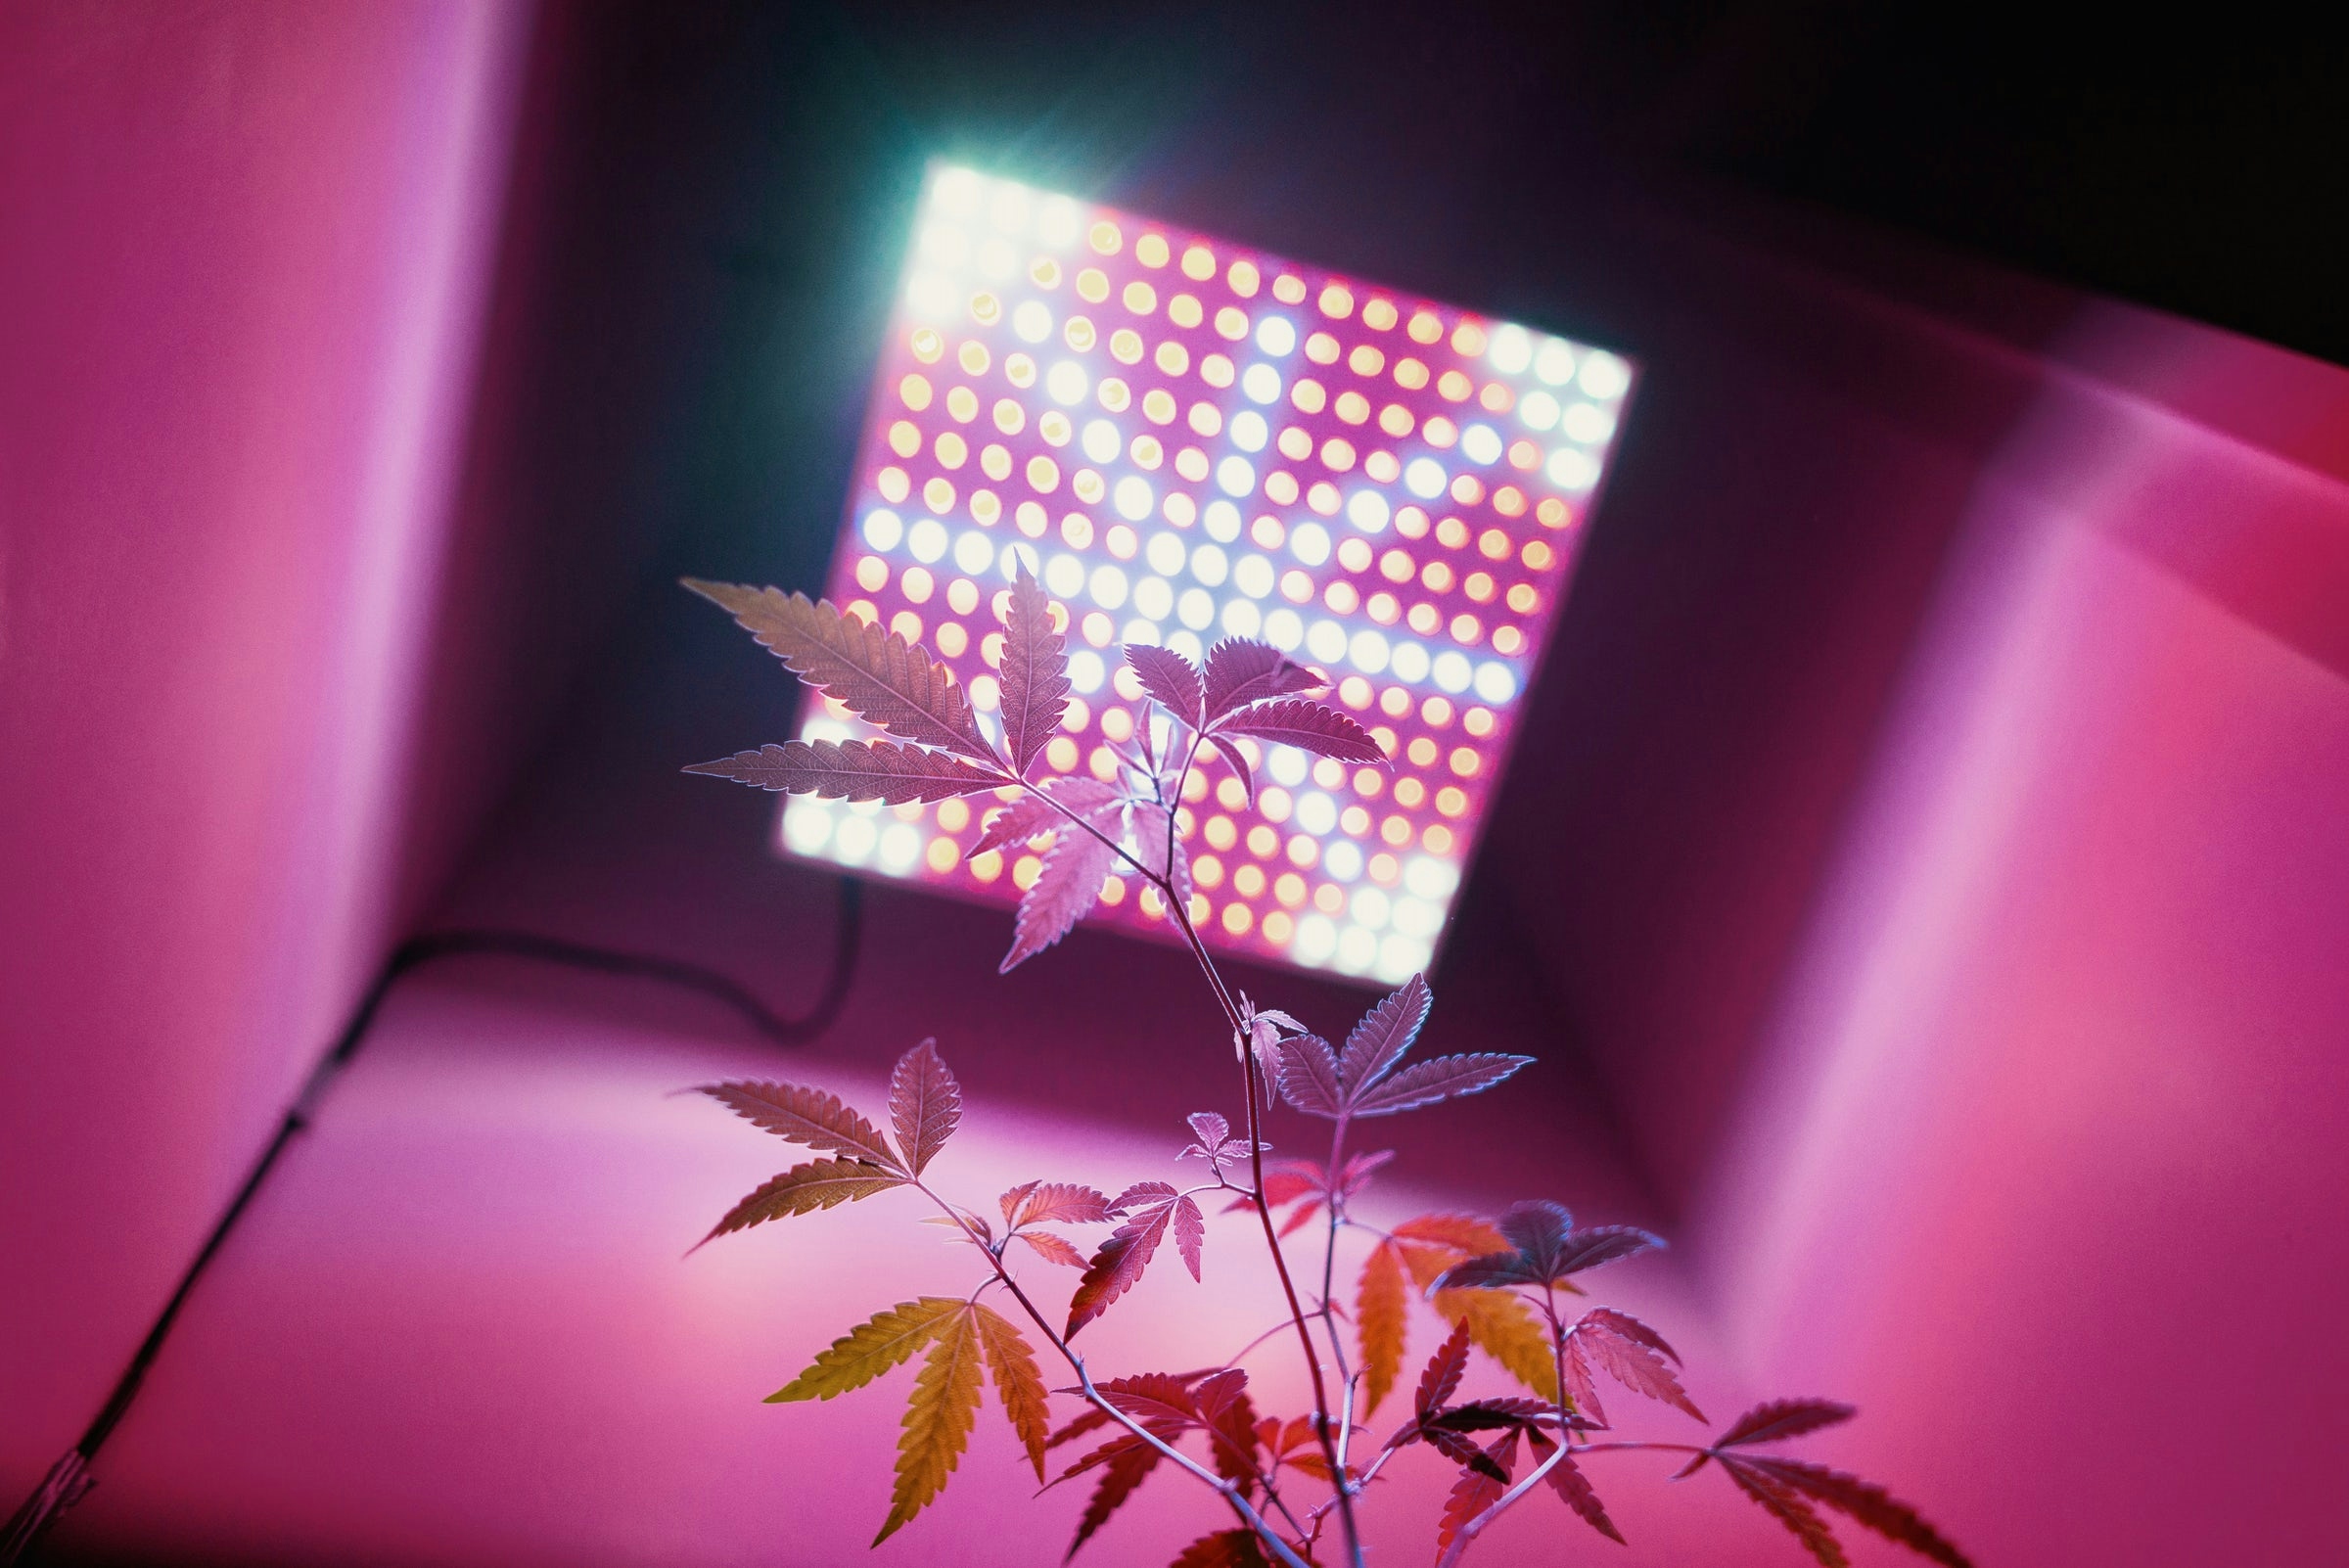 klamre sig Ampere voldgrav These Are The Best LED Grow Lights For Big Yields And Healthy Plants | Herb